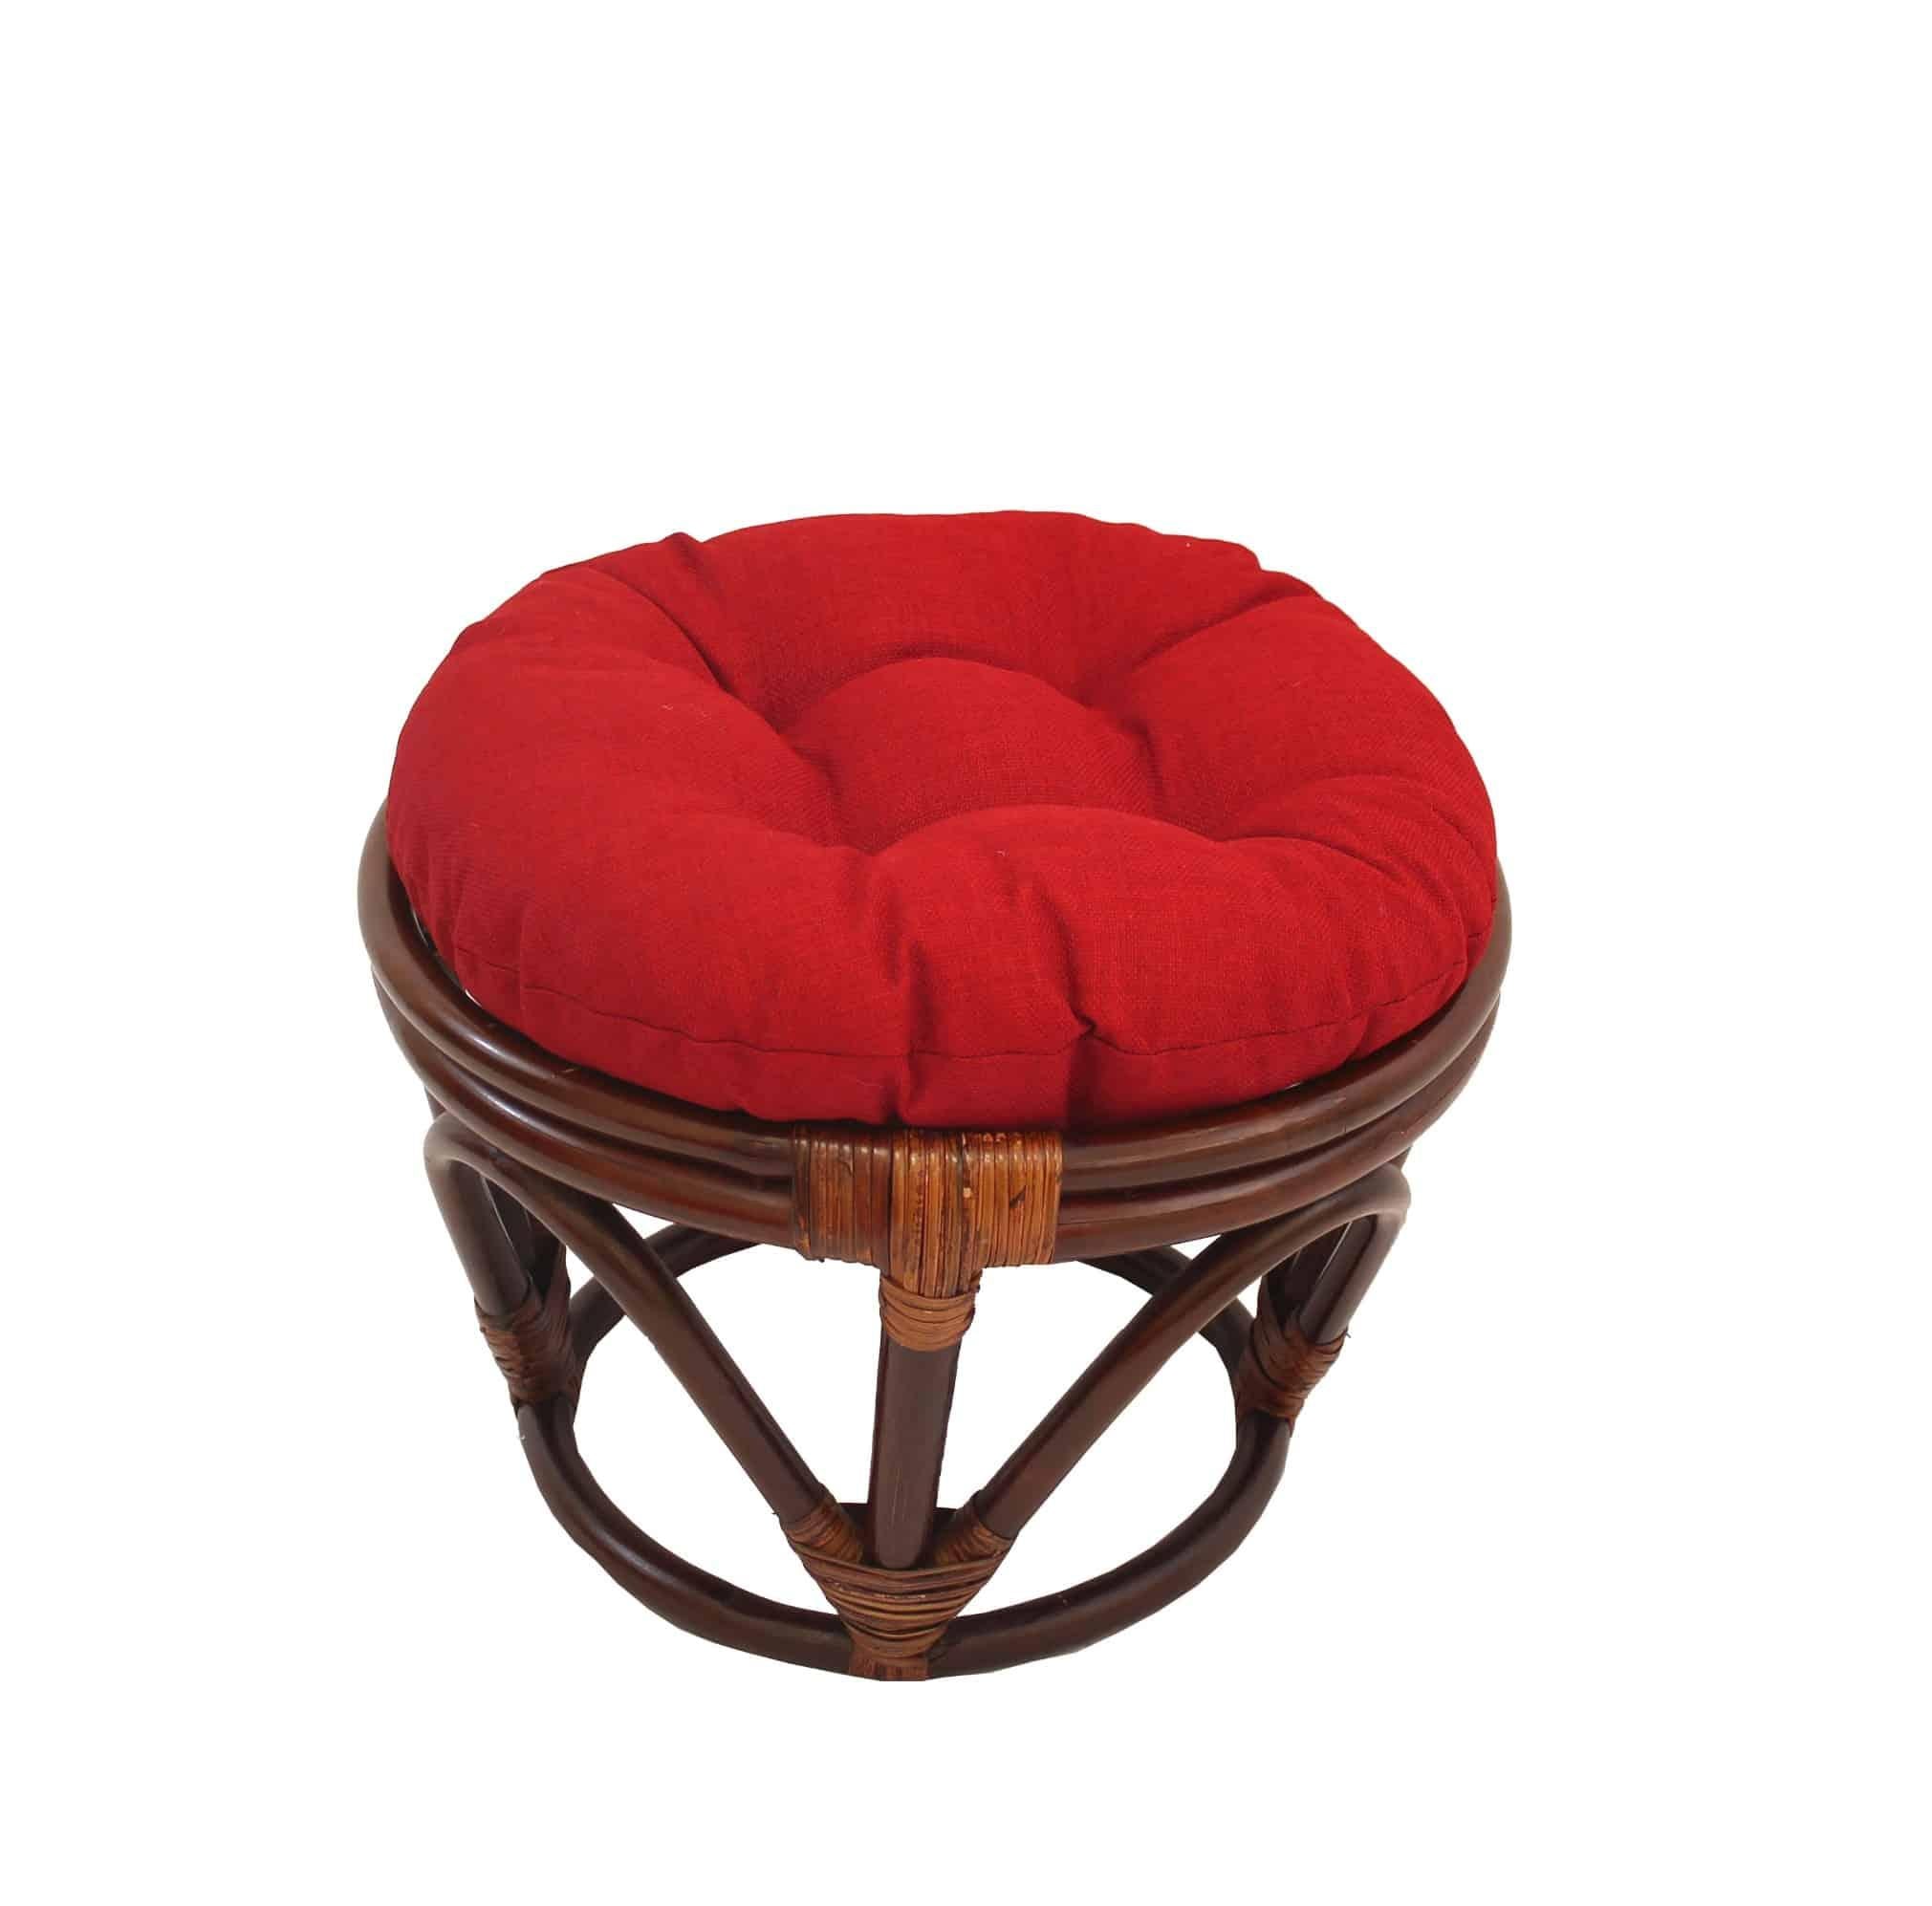 Rattan Ottoman with Outdoor Fabric Cushion